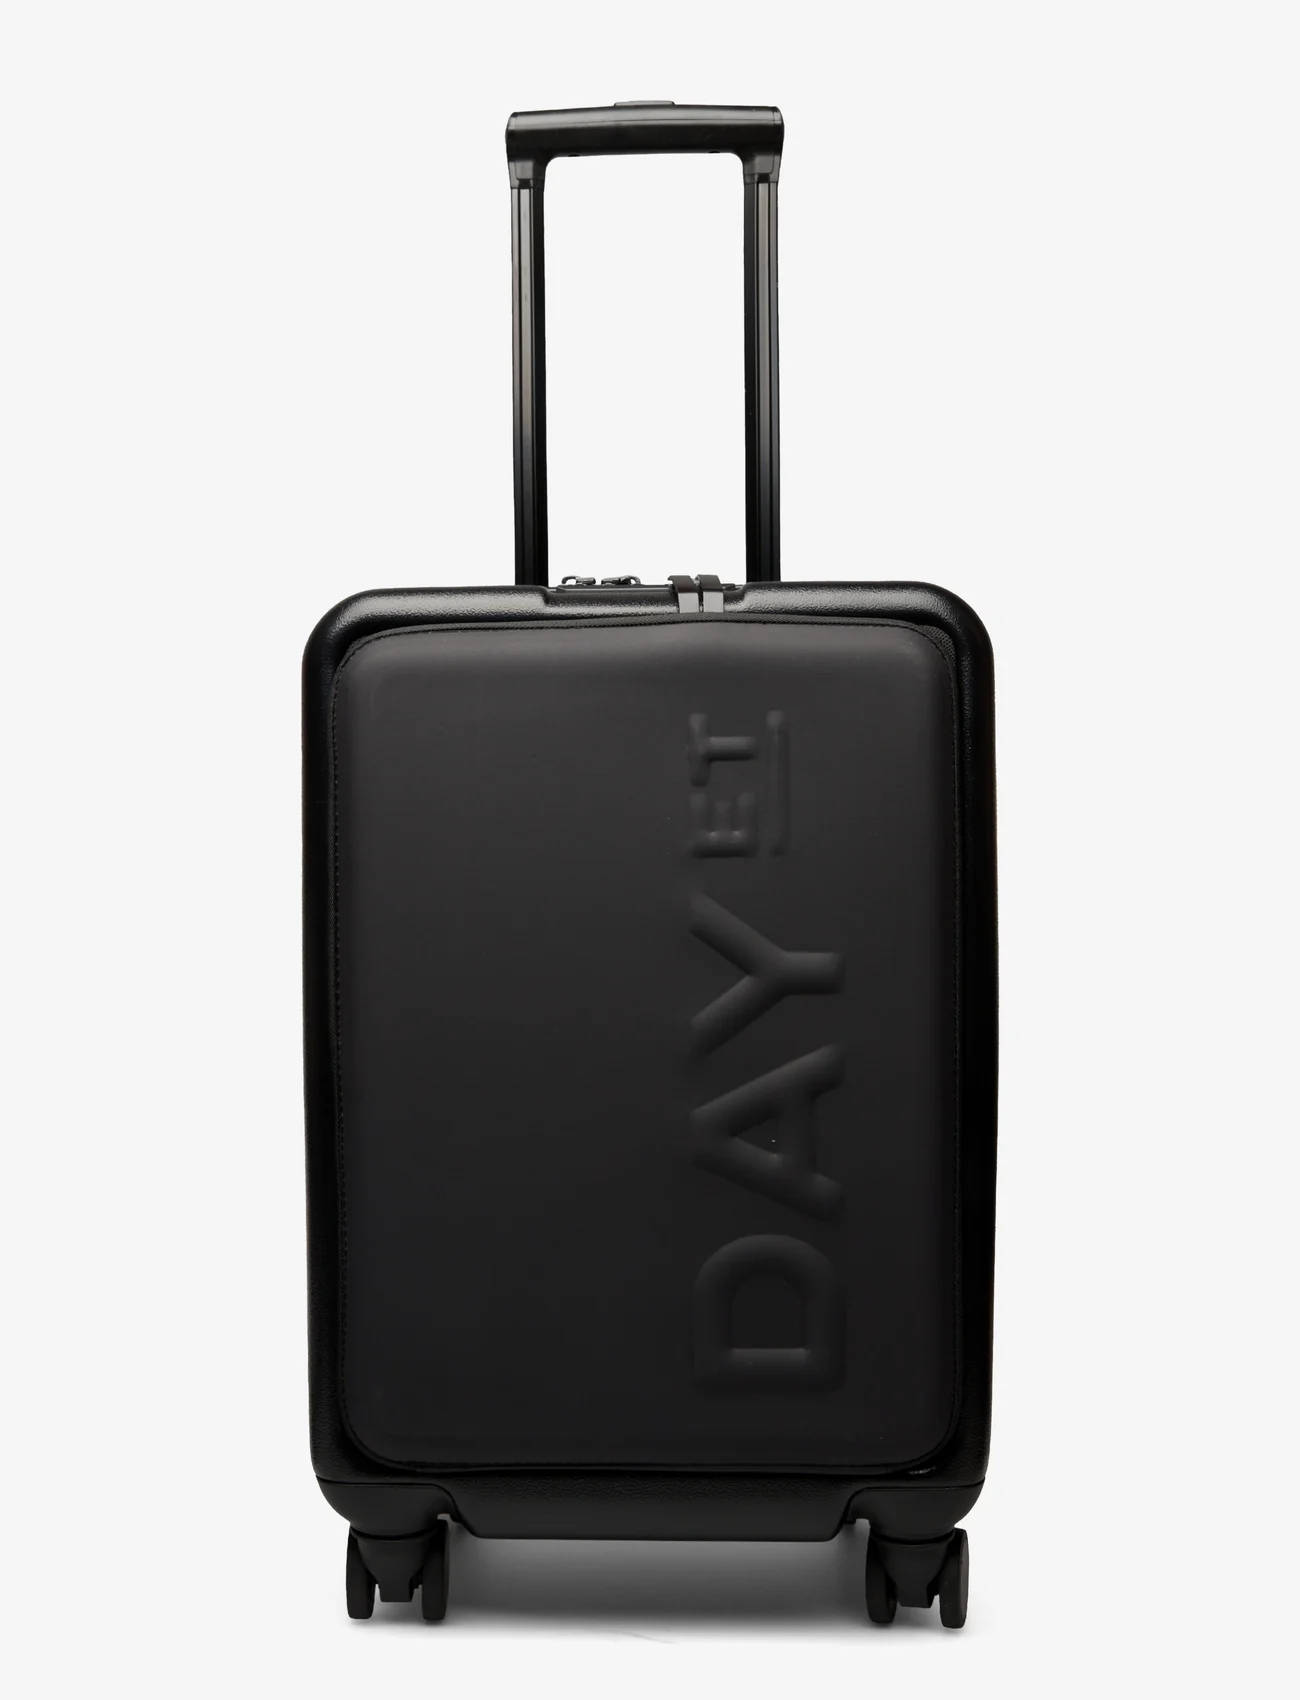 DAY ET - Day CPH 20" Suitcase Onboard - koffer - black - 0